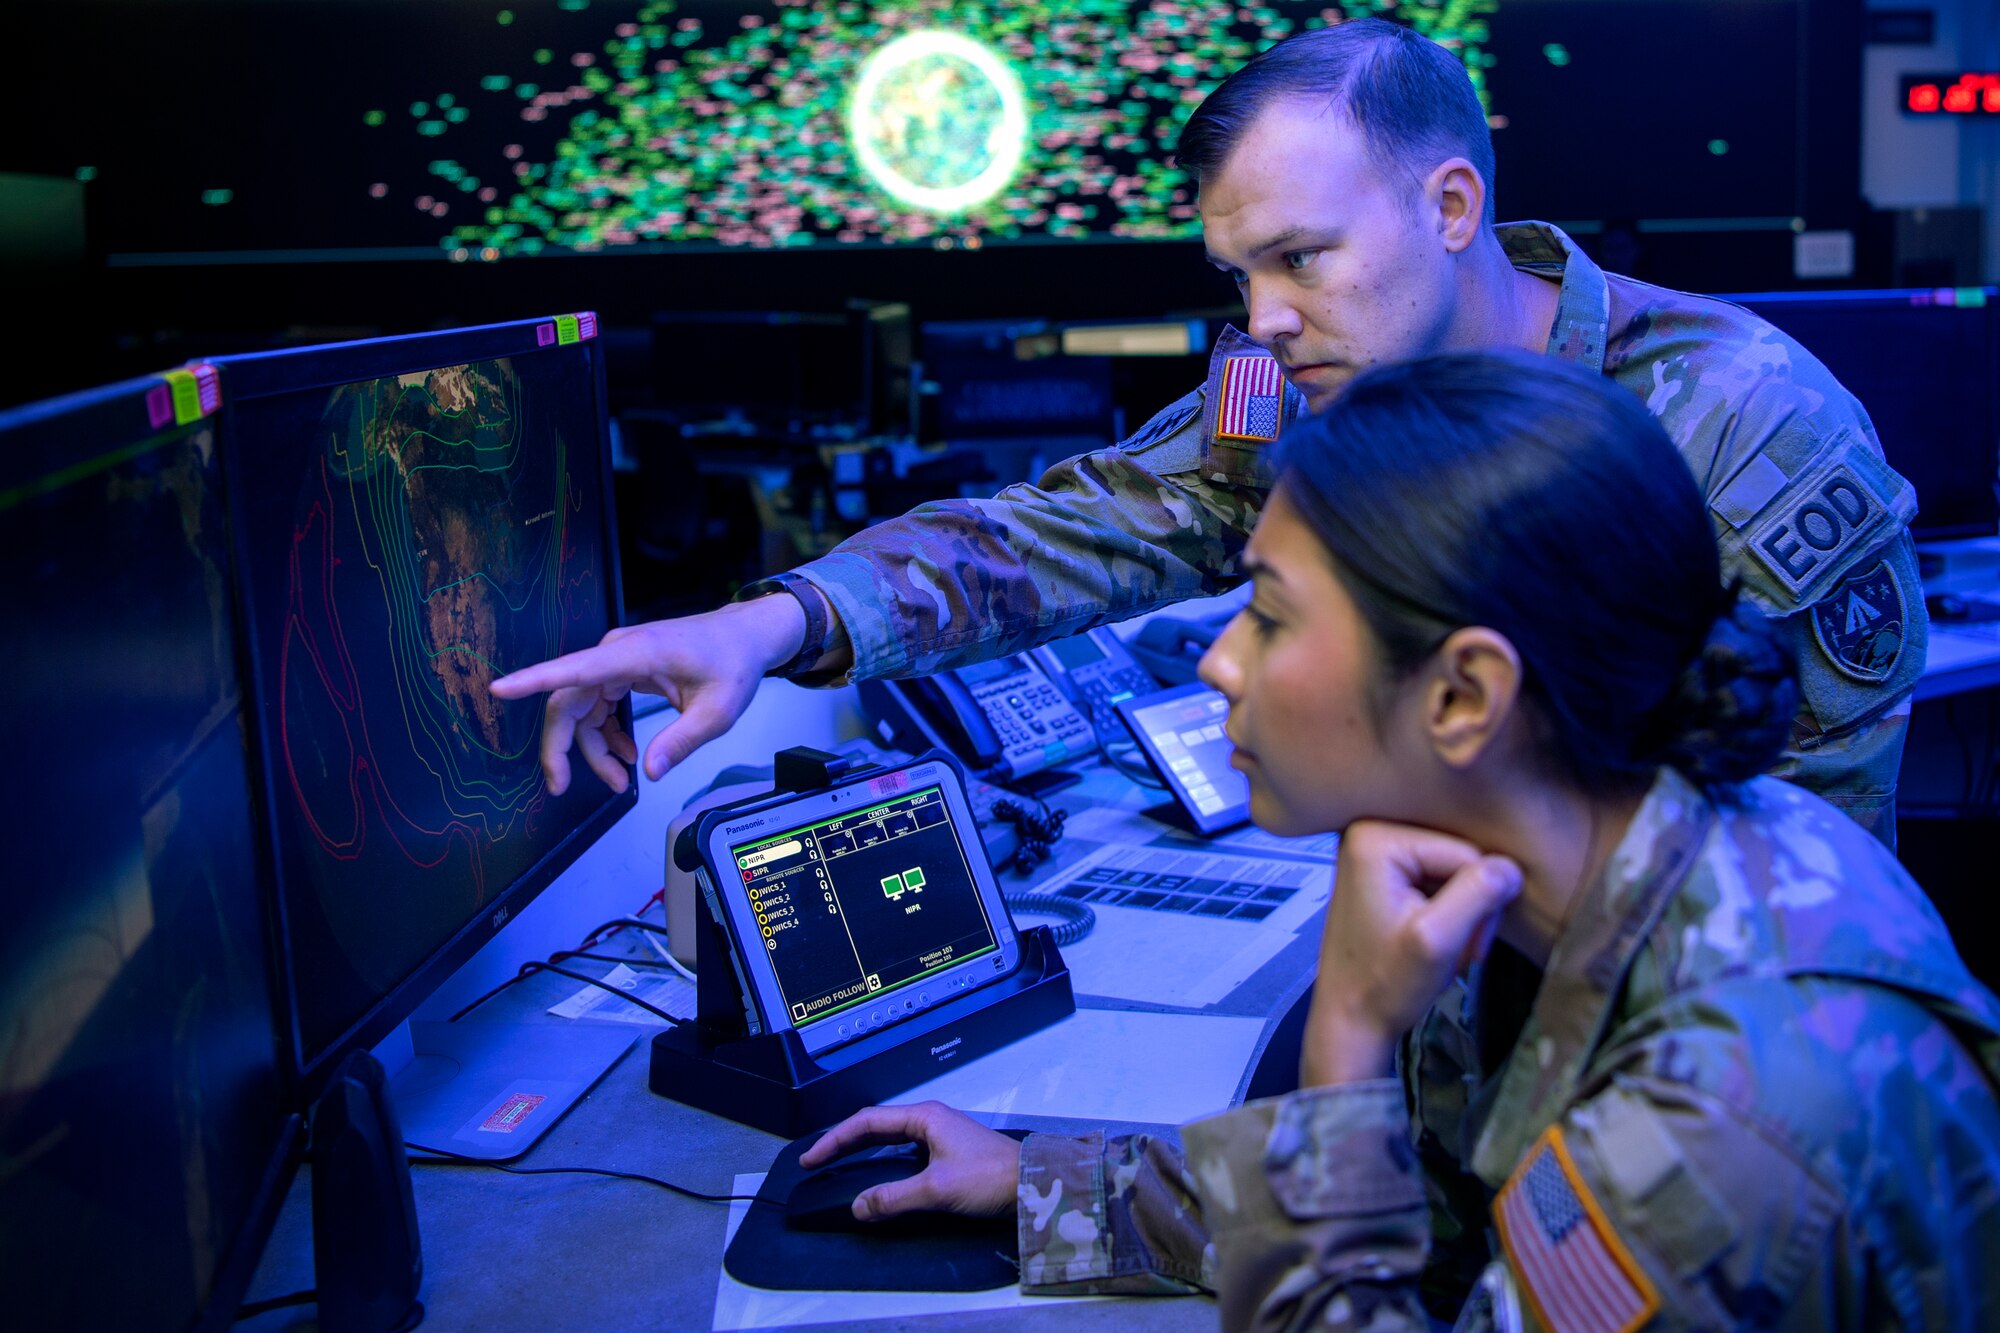 Man and woman in uniform looking at computer screen